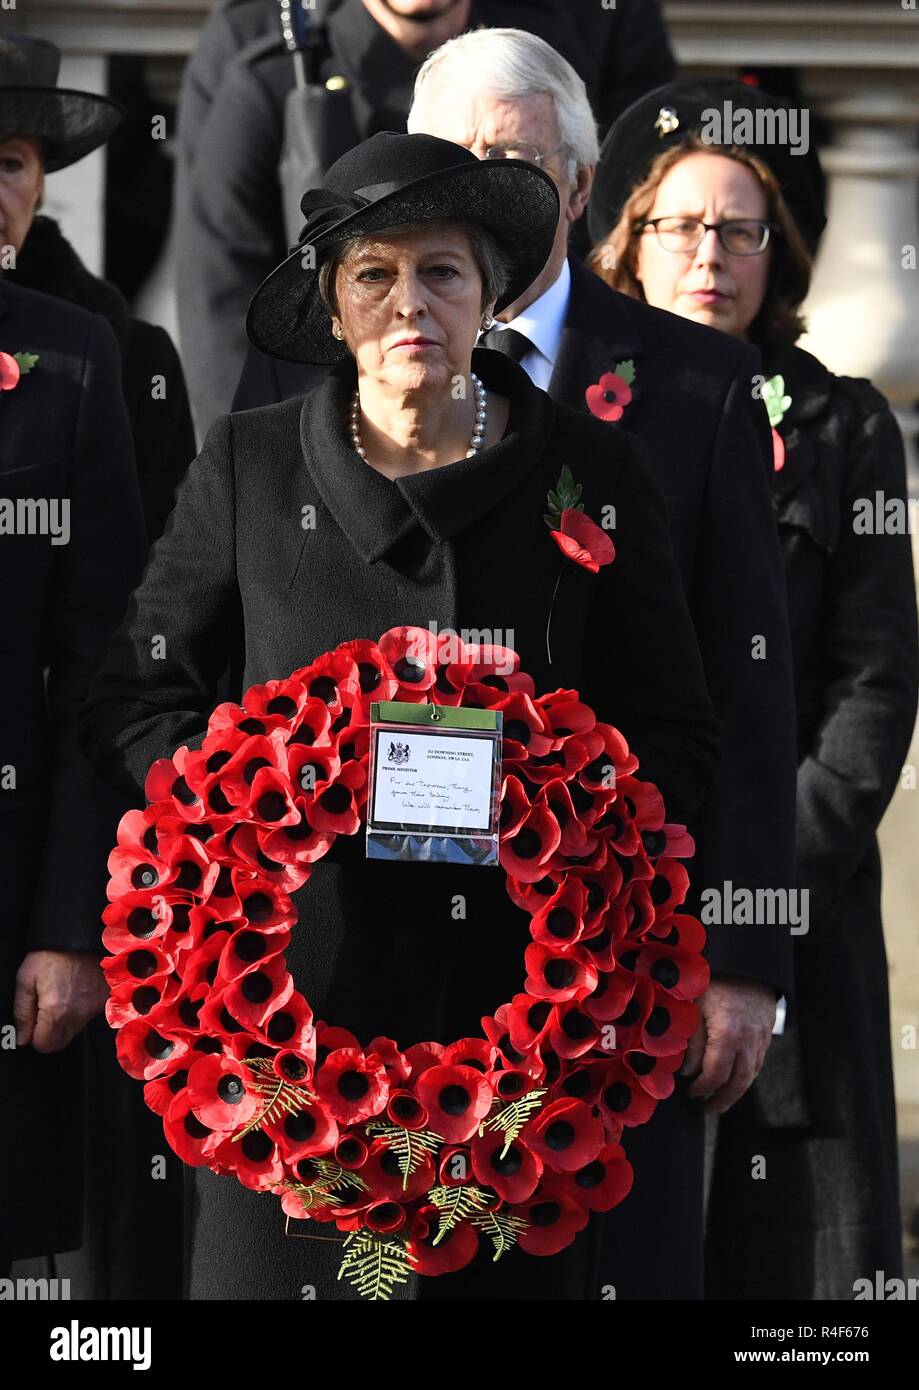 11/11/2018. London, United Kingdom. Remembrance Sunday and the Centenary of the Armistice. Theresa May and Jeremy Corbyn join the Queen Elizabeth II accompanied by members of the  Royal family including Prince Charles, Prince of Wales and Camilla, The Duchess of Cornwall,  Prince William, Duke of Cambridge and Catherine, The  Duchess of Cambridge,  Prince Harry, The Duke of Sussex and Meghan, The Duchess of Sussex , attend the Remembrance Sunday service at The Cenotaph in central London on  the Centenary of the end of the First World War.  Picture by Andrew Parsons / Parsons Media Stock Photo